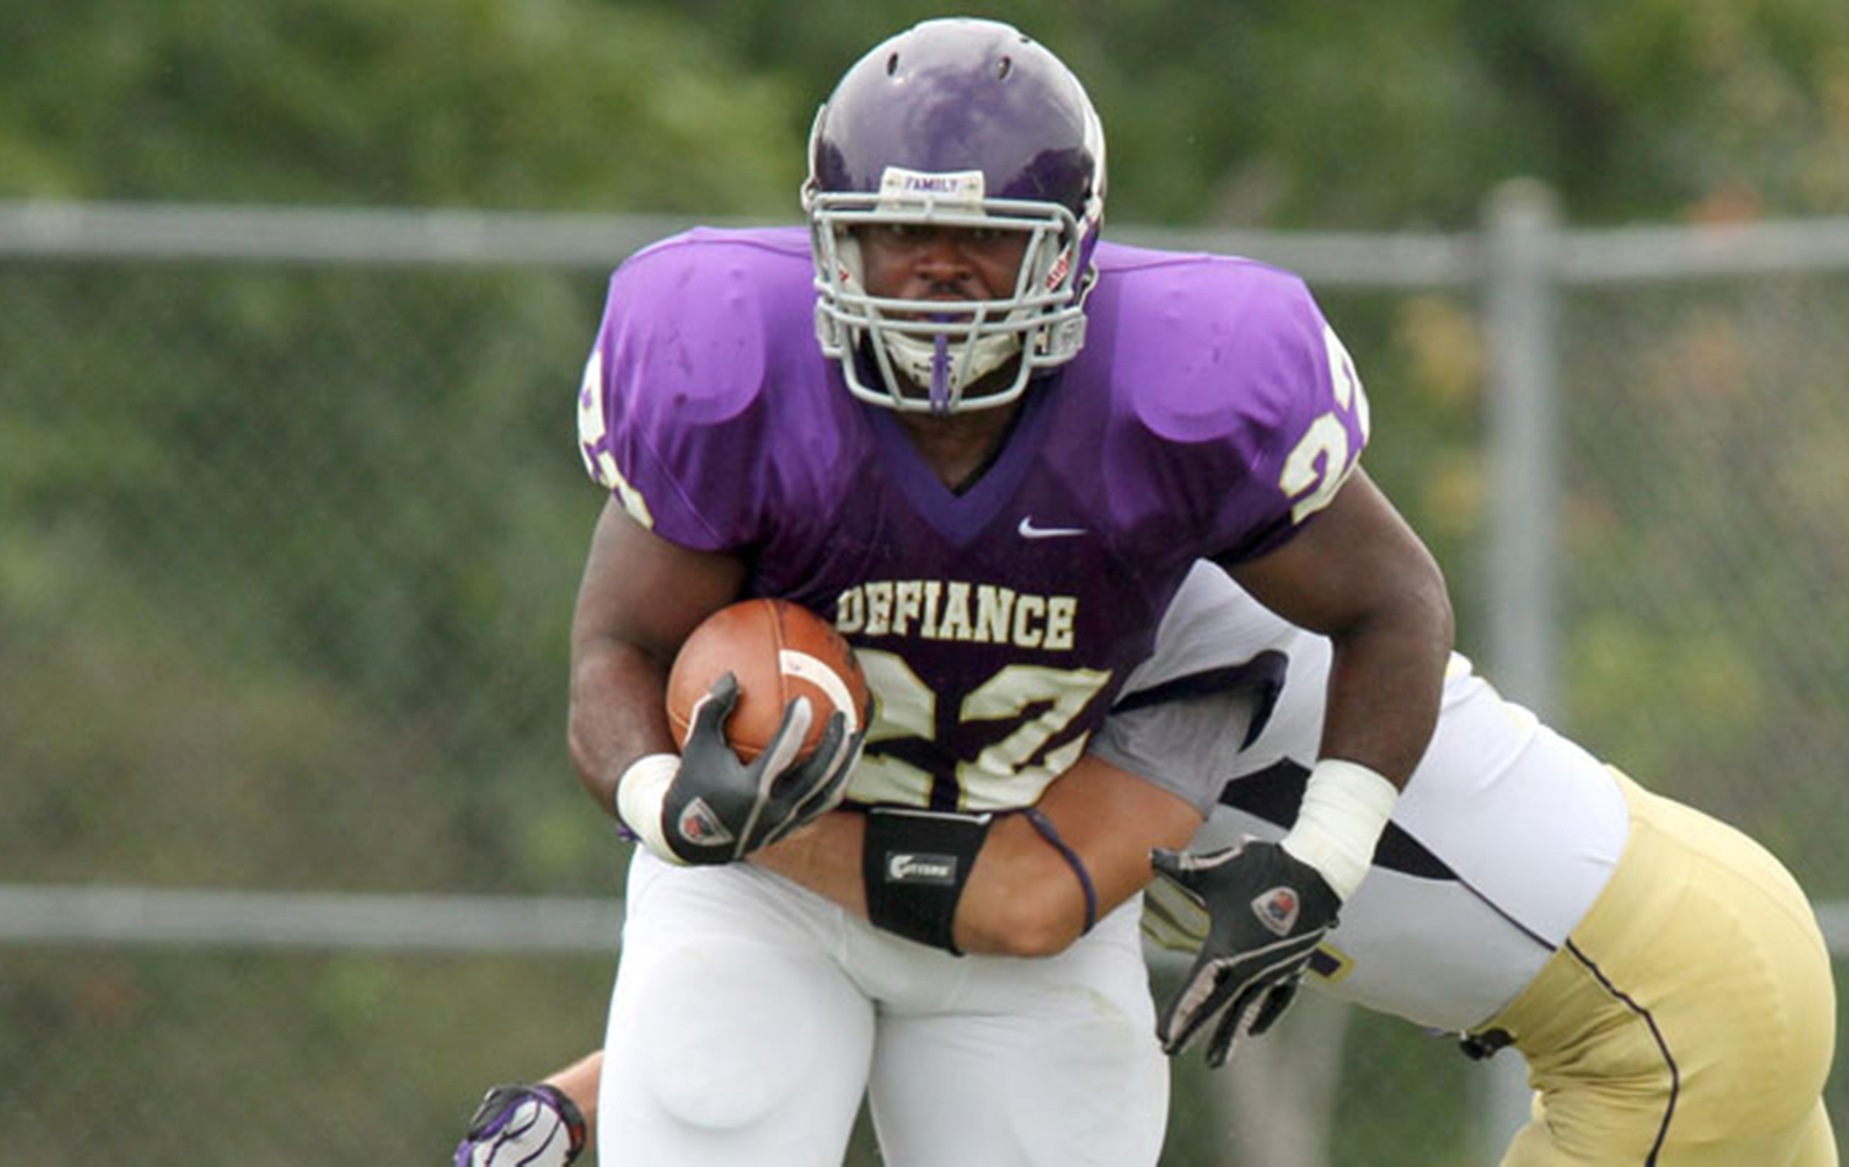 VOTE NOW! Aaron Smith for HCAC Play of the Week